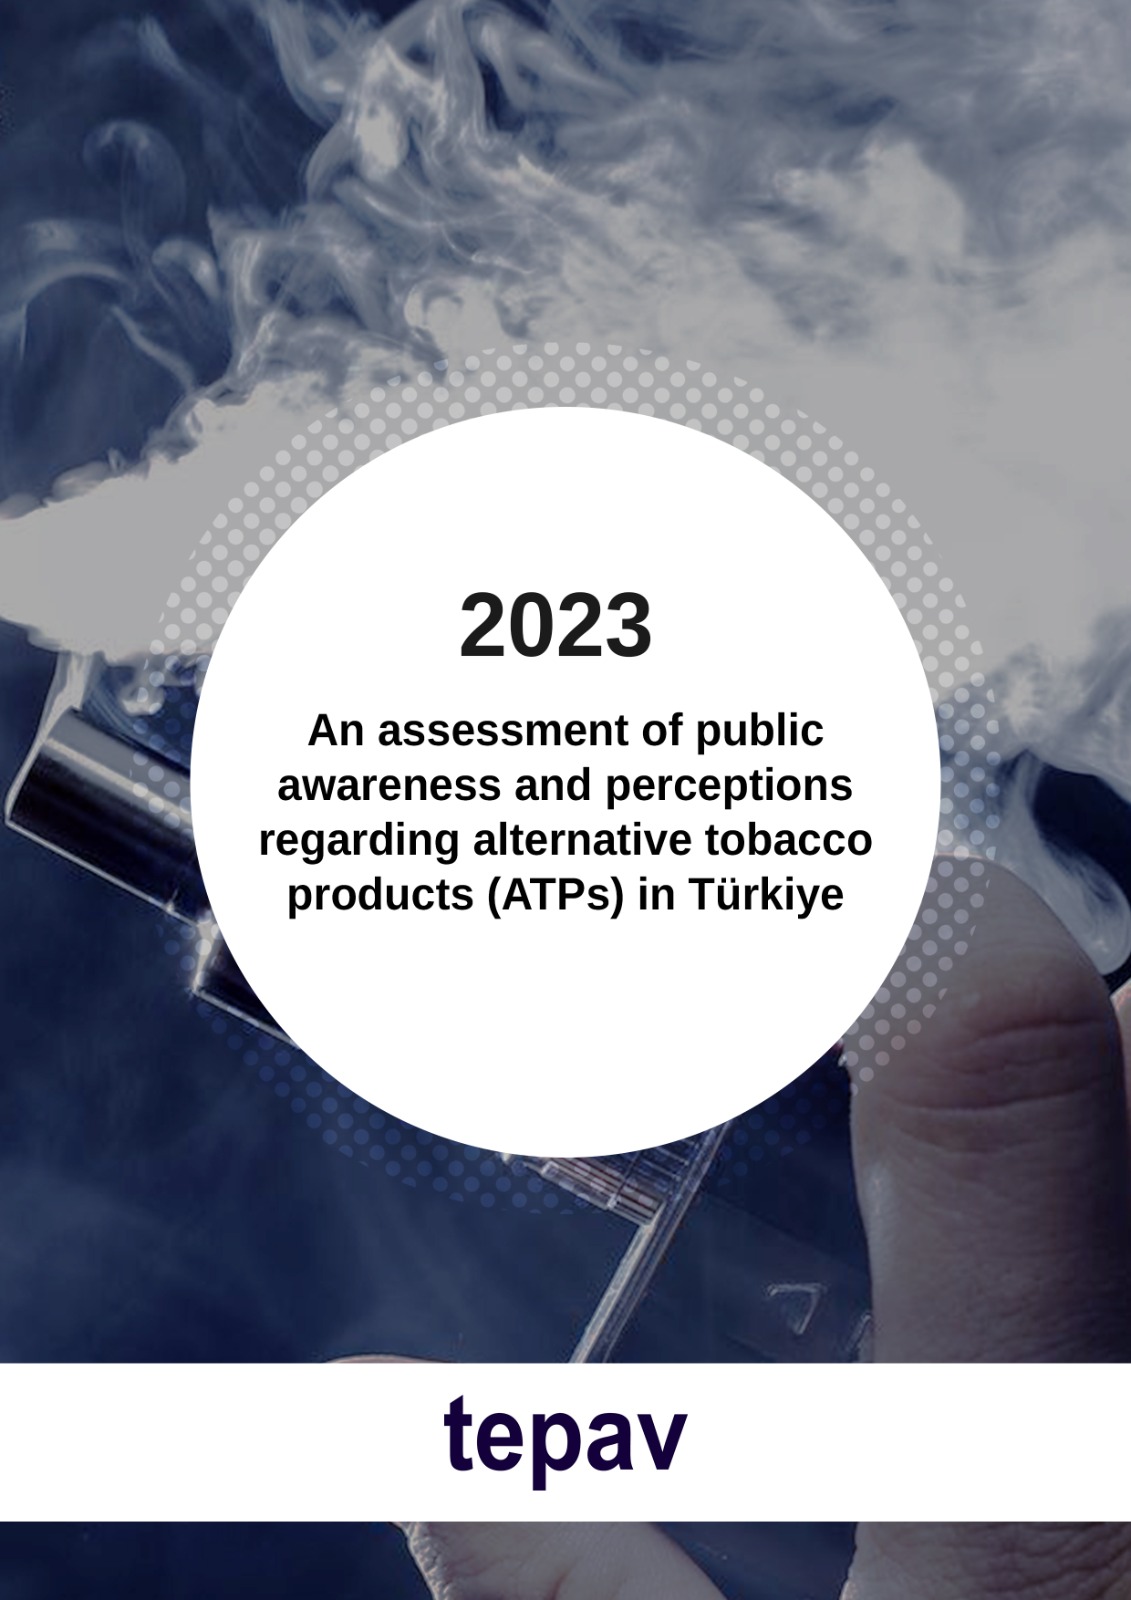 An assessment of public awareness and perceptions regarding alternative tobacco products (ATPs) in Türkiye